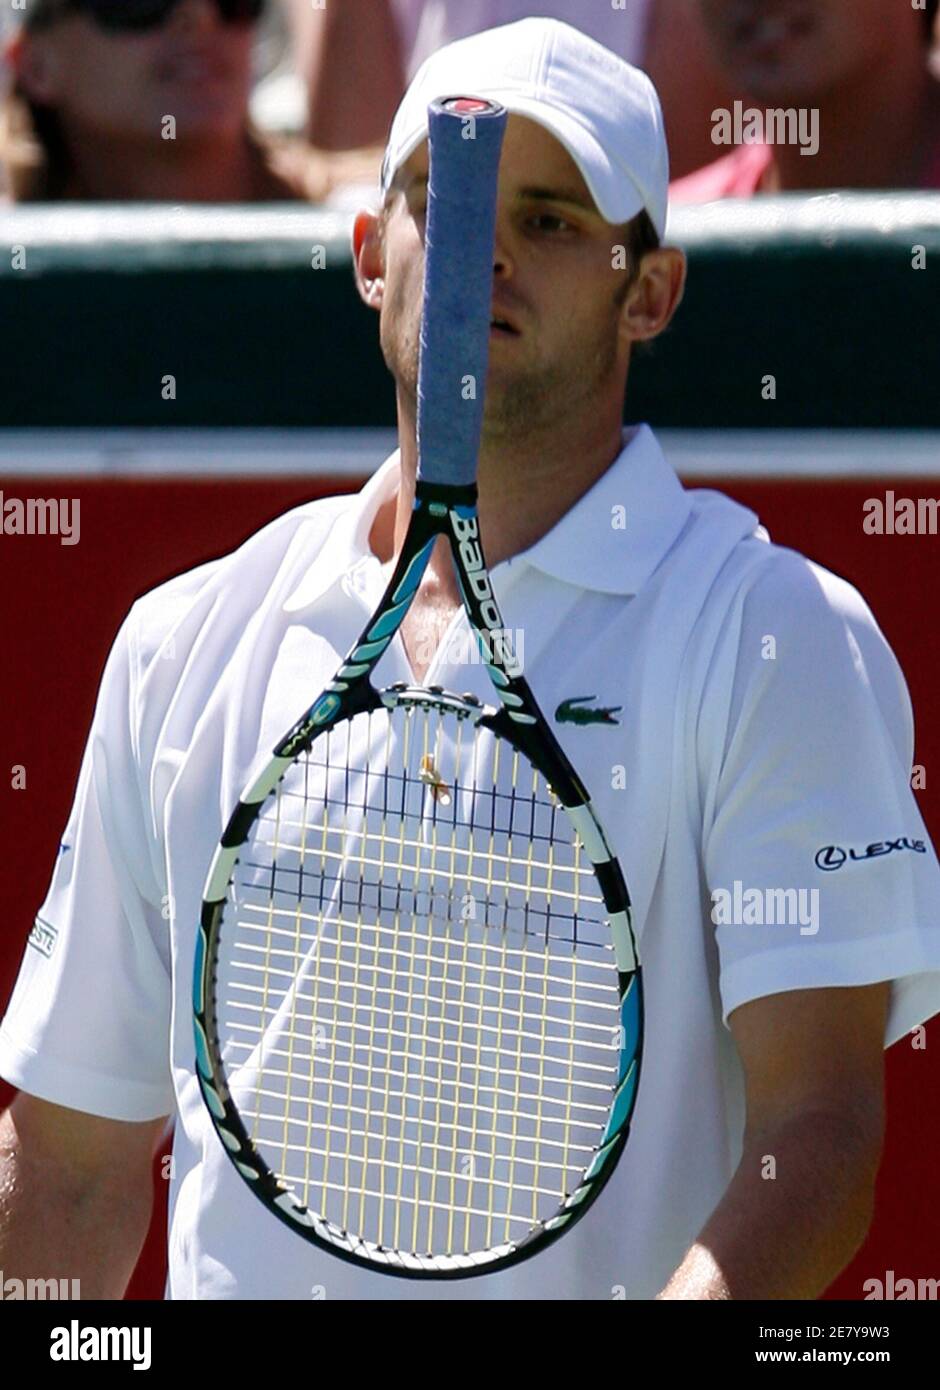 Andy Roddick from the U.S. throws his racquet in the air during the final  at the Kooyong Classic tennis tournament against Switzerland's Roger Federer  in Melbourne January 13, 2007. REUTERS/David Gray (AUSTRALIA